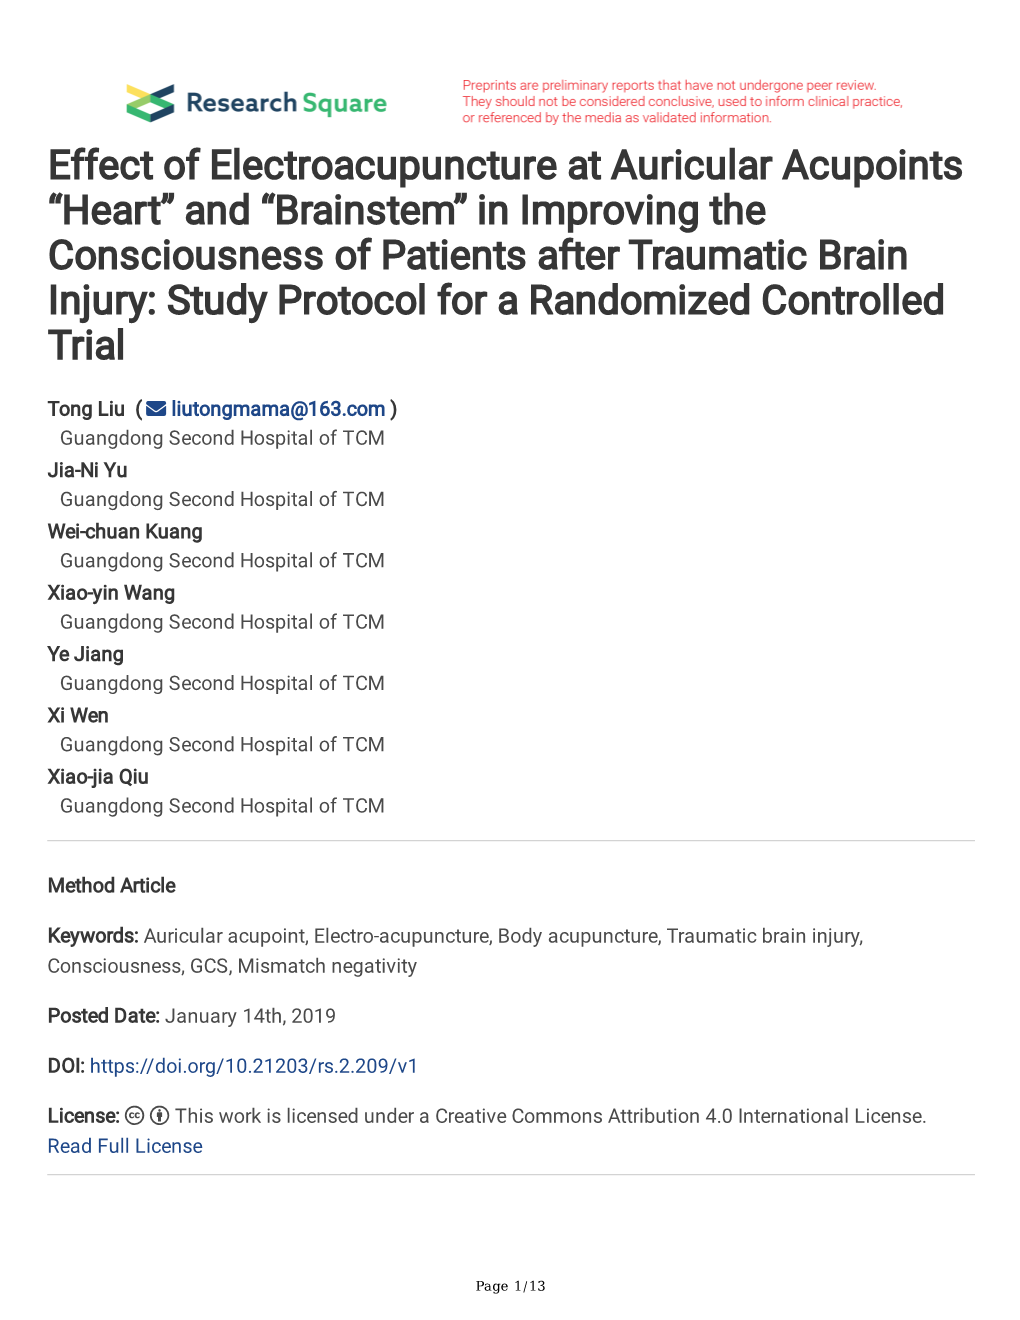 Effect of Electroacupuncture at Auricular Acupoints “Heart”